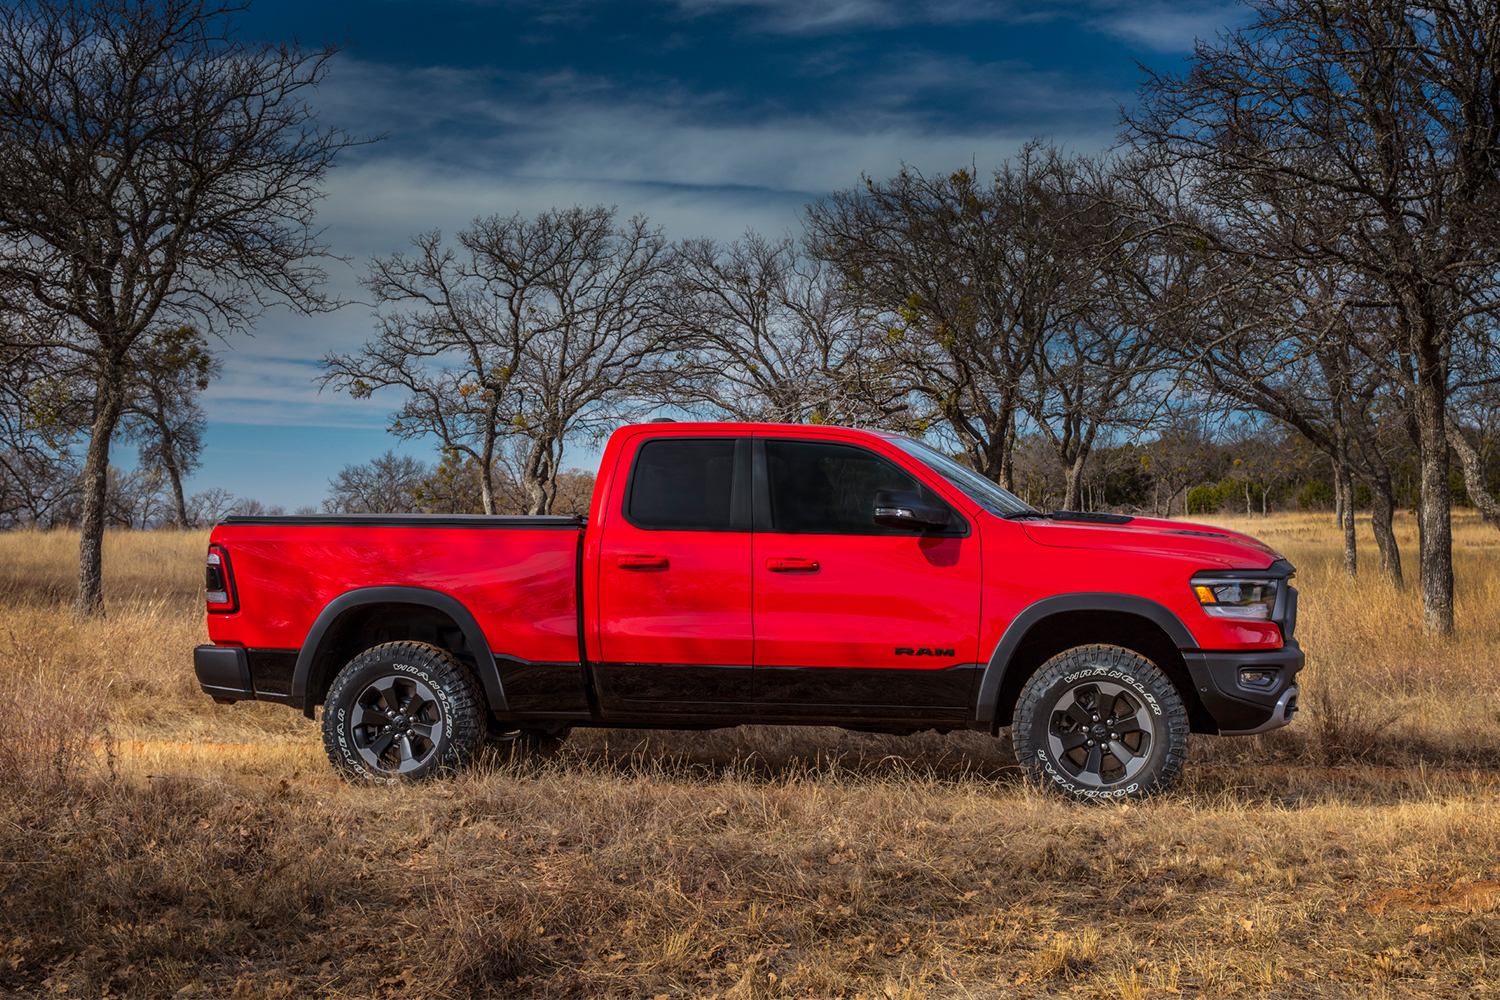 A profile view of a red Ram Trucks 1500 Rebel pickup sitting in the grass in front of a line of trees